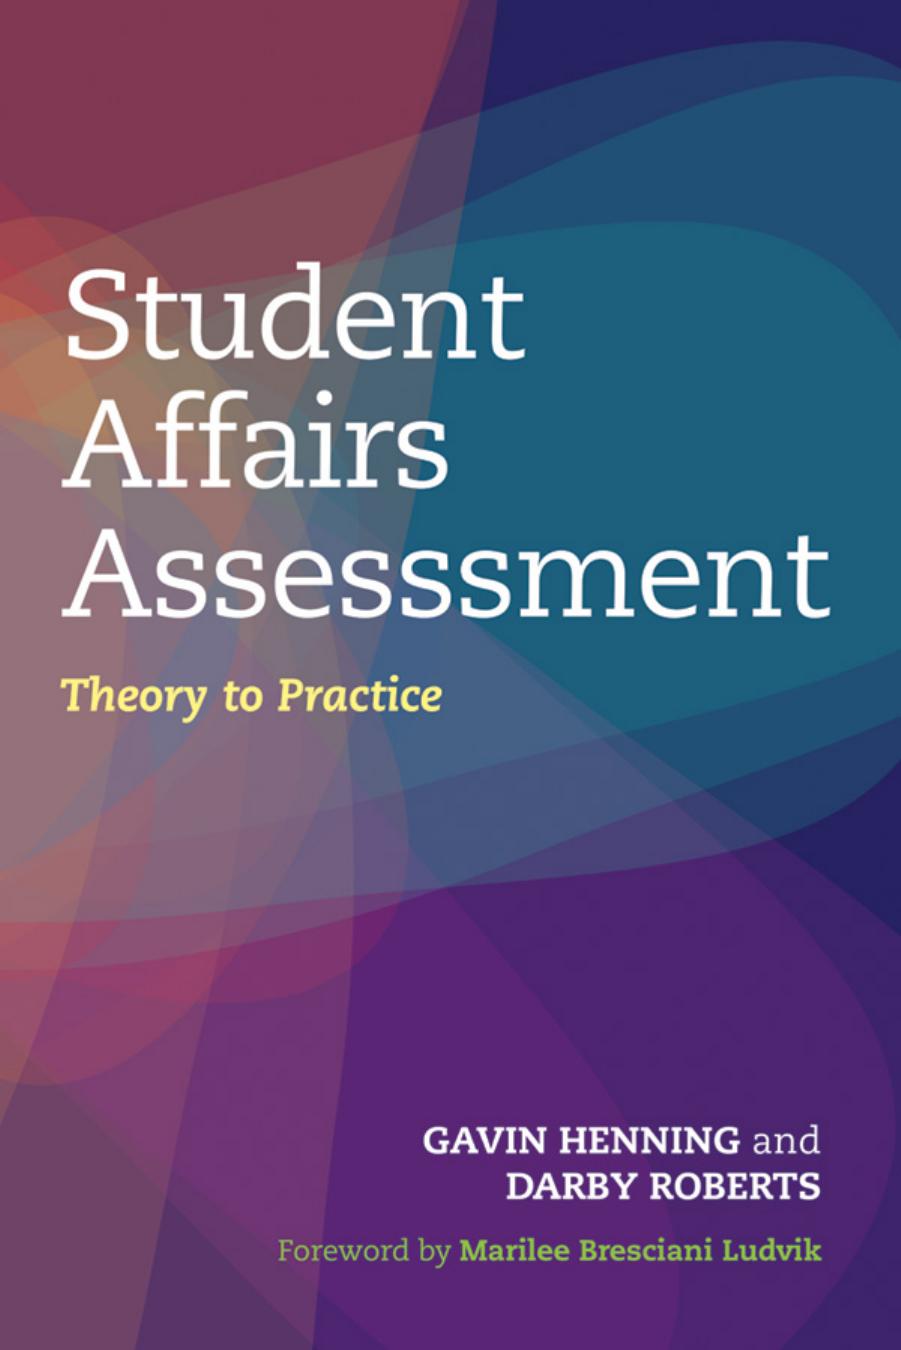 Student Affairs Assessment : Theory to Practice by Gavin W. Henning; Darby Roberts; Marilee J. Bresciani Ludvik